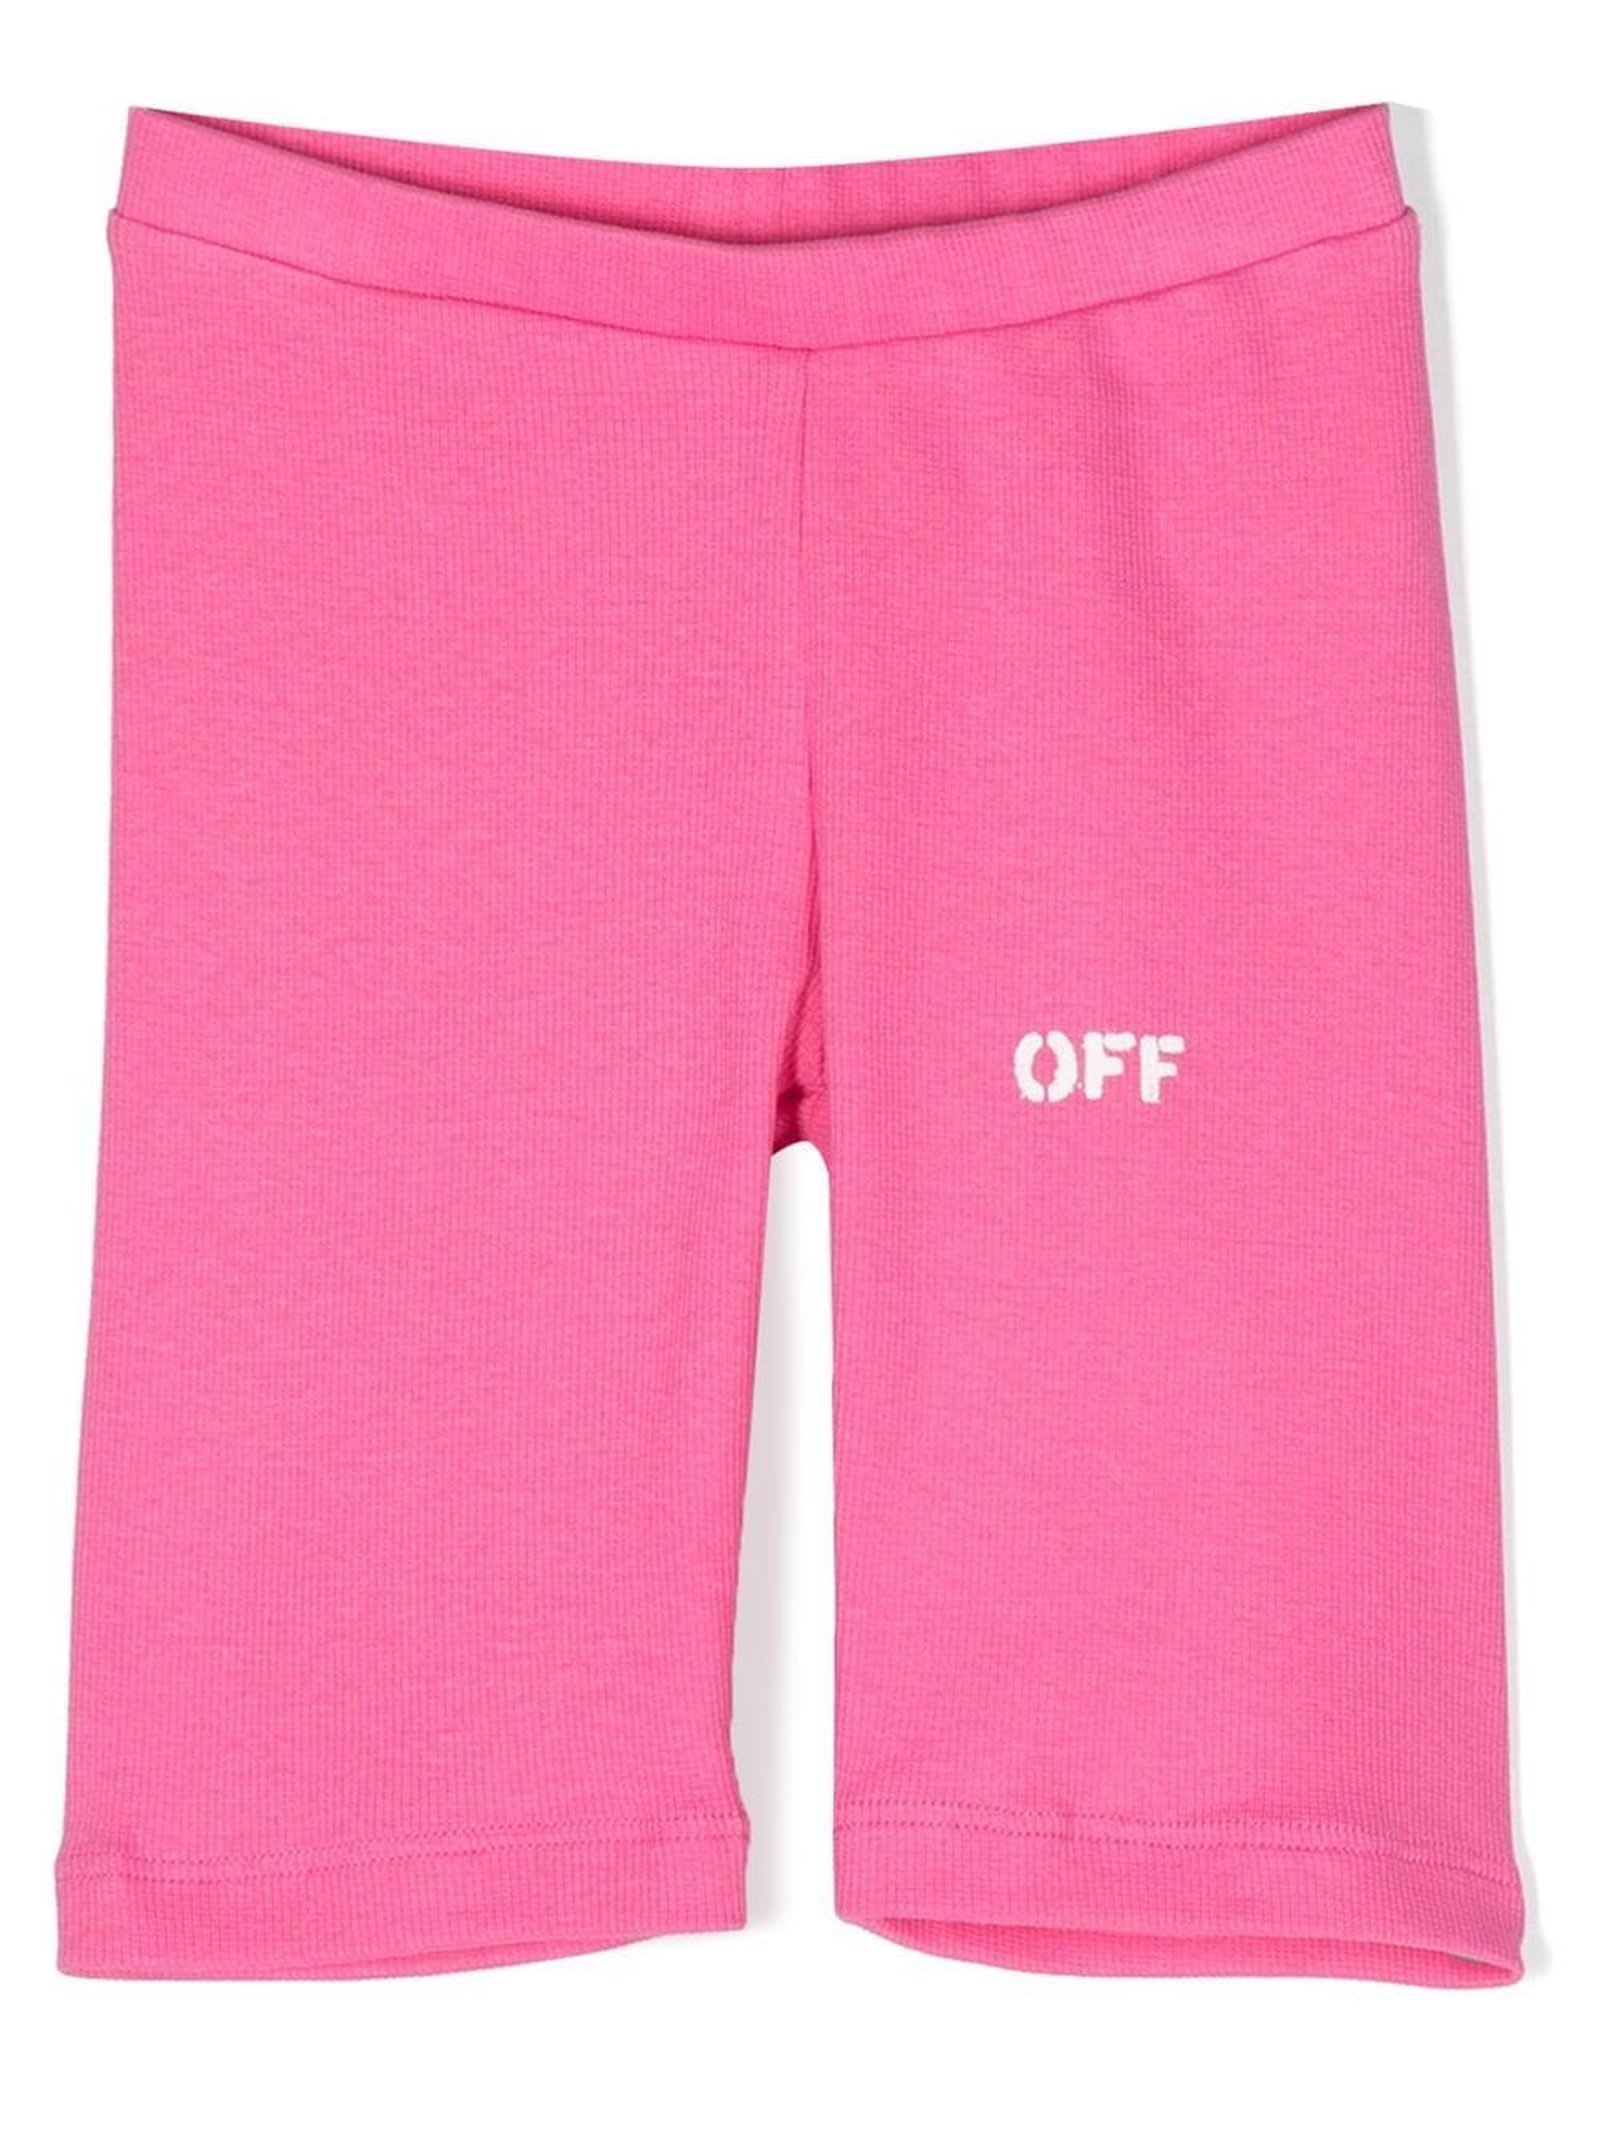 Off-White Pink Cotton Shorts